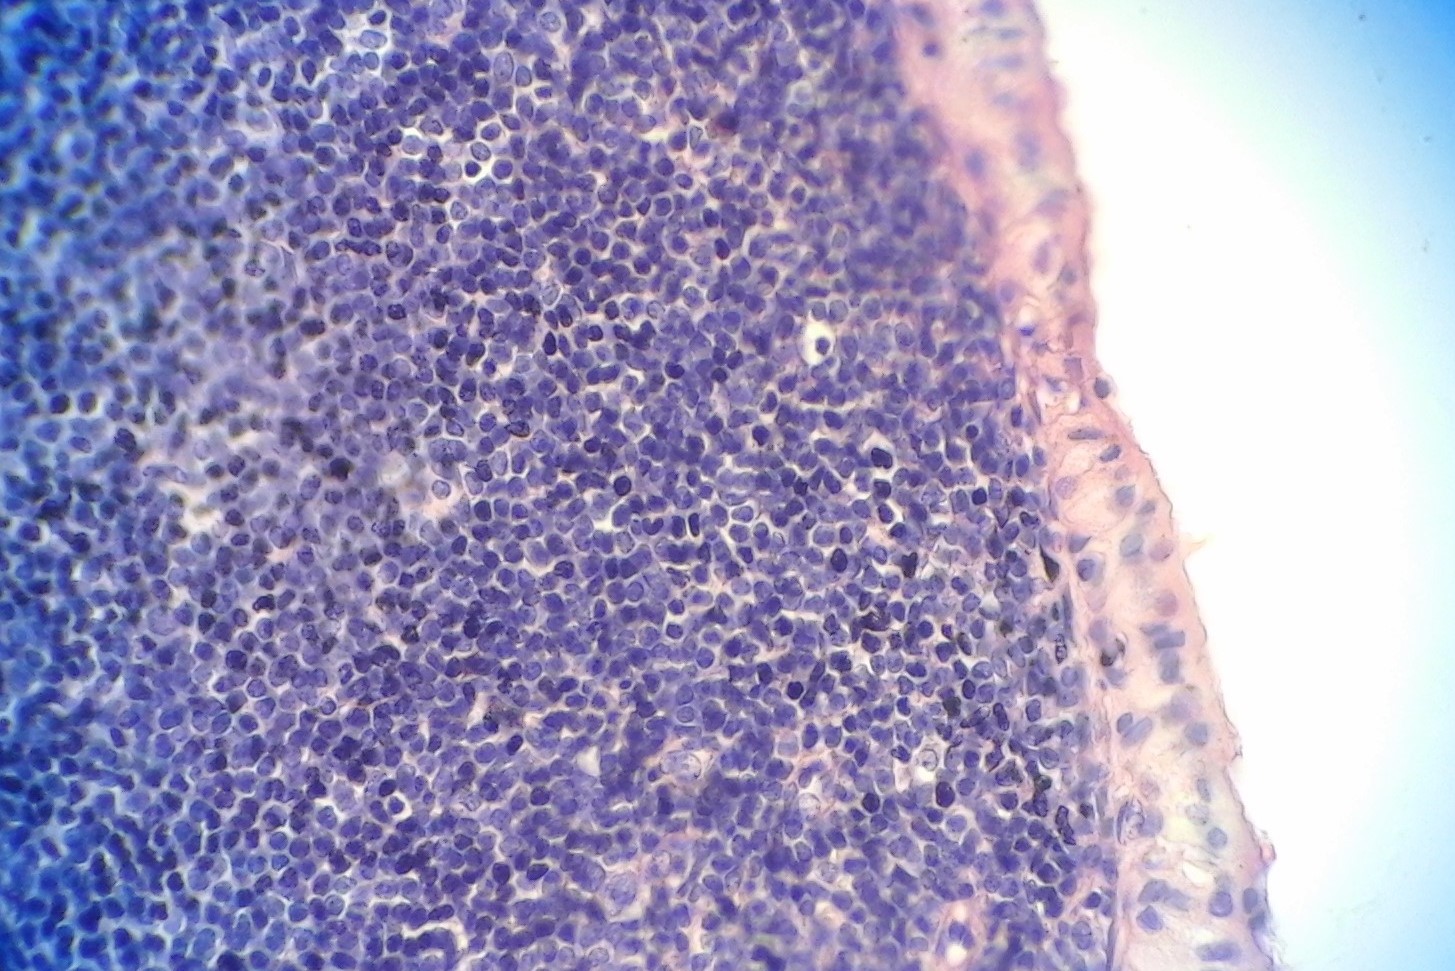 Figure 3:
Photomicrograph showing a bilayered eosinophilic oncocytic epithelium lining the cyst lumen with lymphoid aggregates in the stroma, (Hematoxylin and eosin, x 400)